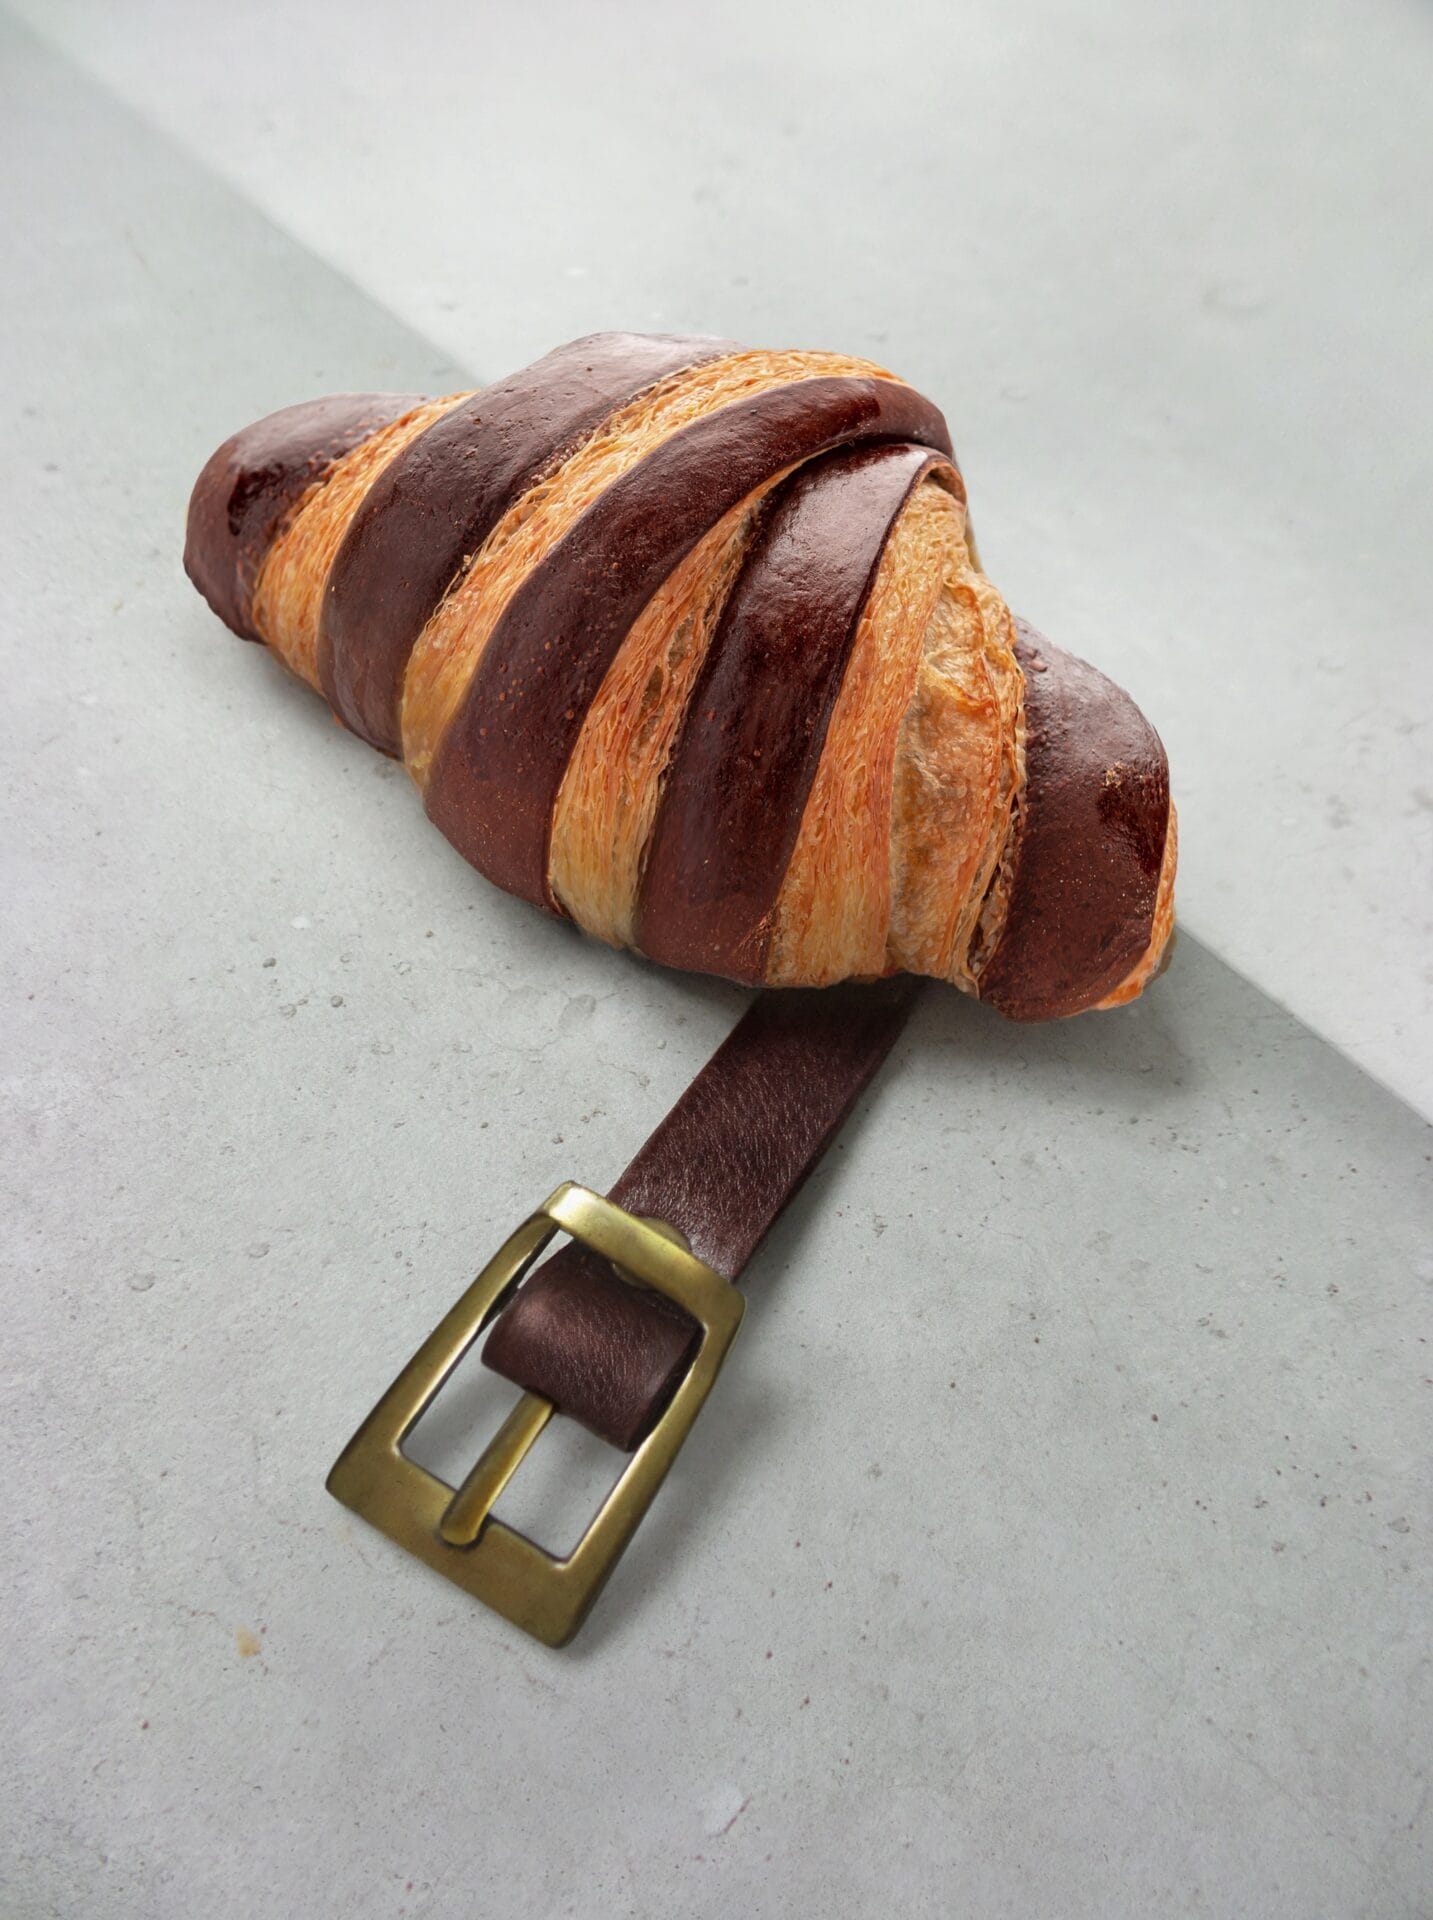 a croissant with dark brown stripes with a belt buckle extending from it as if the belt has been wrapped around the pastry